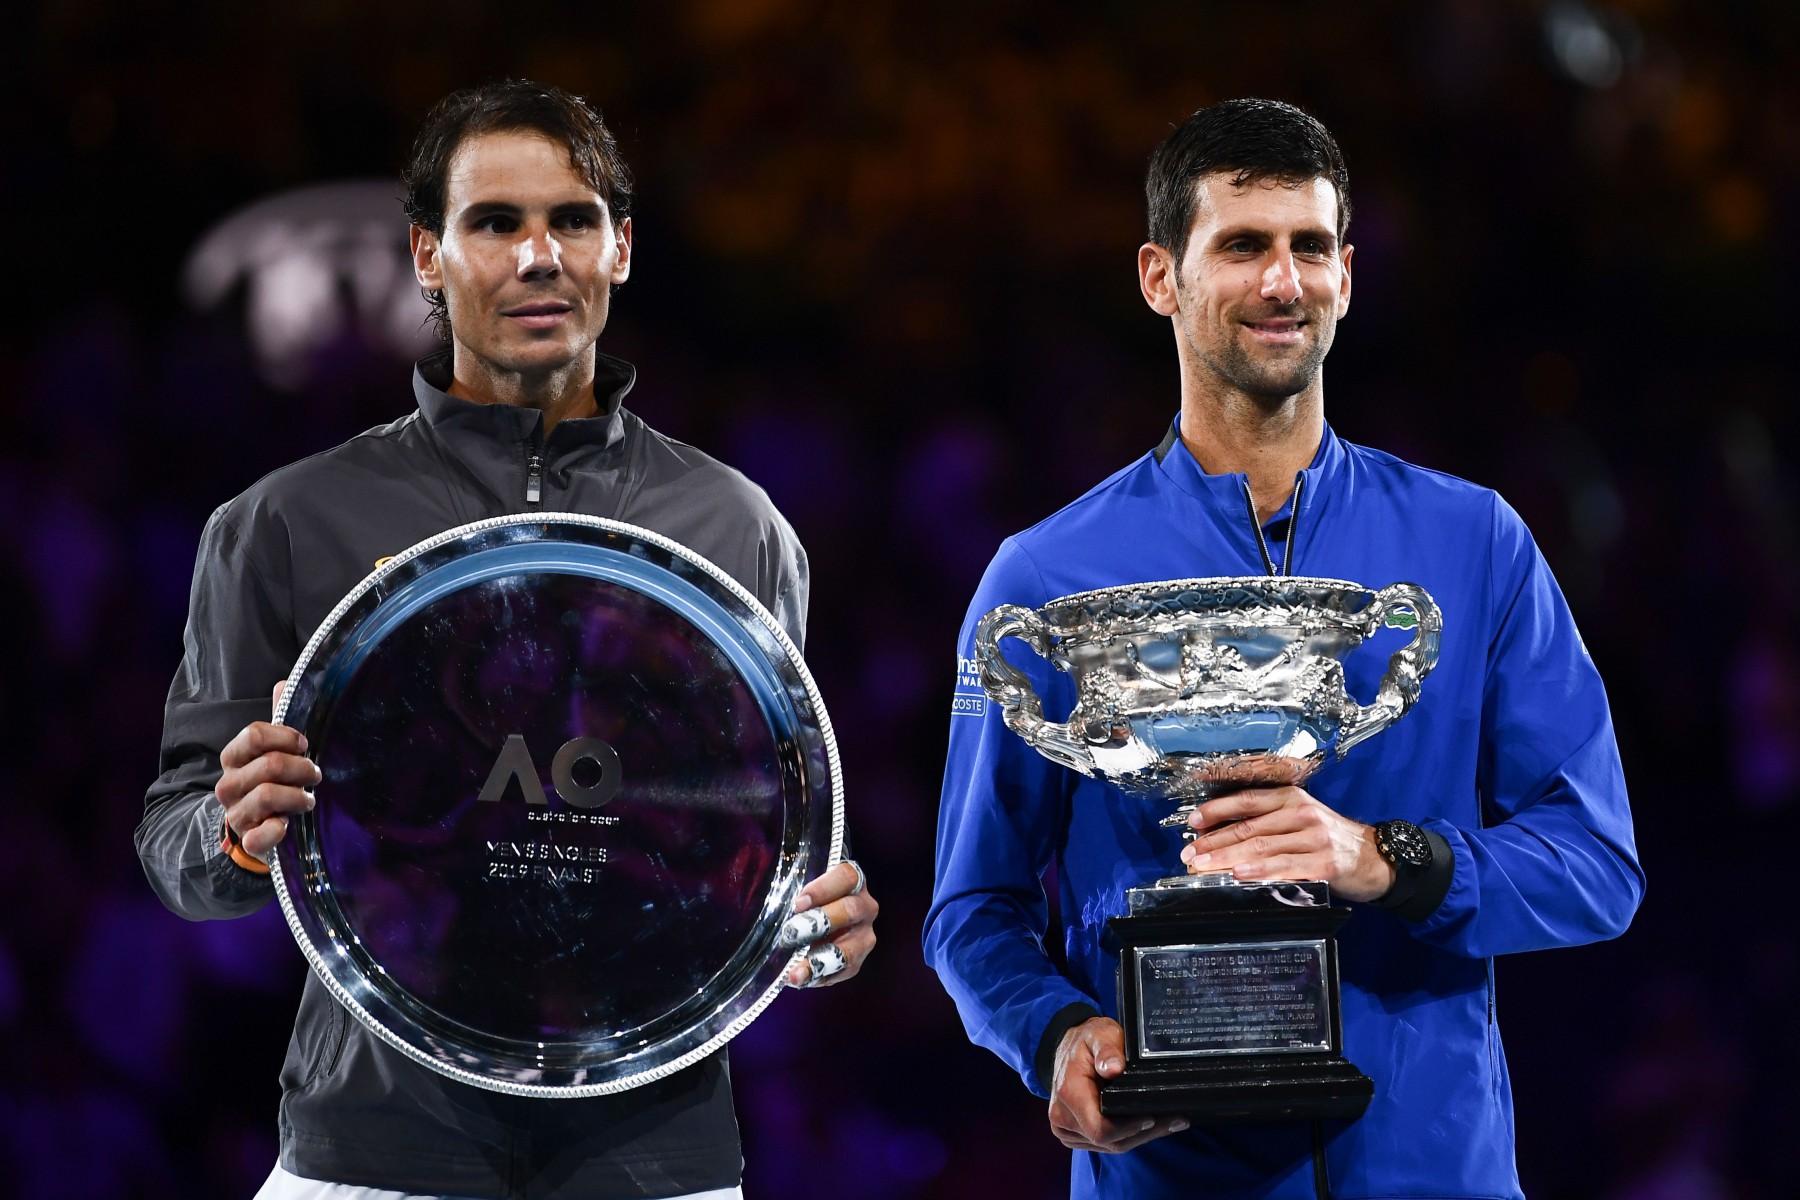 The battle for the year-end world No1 between Rafael Nadal and Novak Djokovic could come down to the wire but will be settled by Saturday